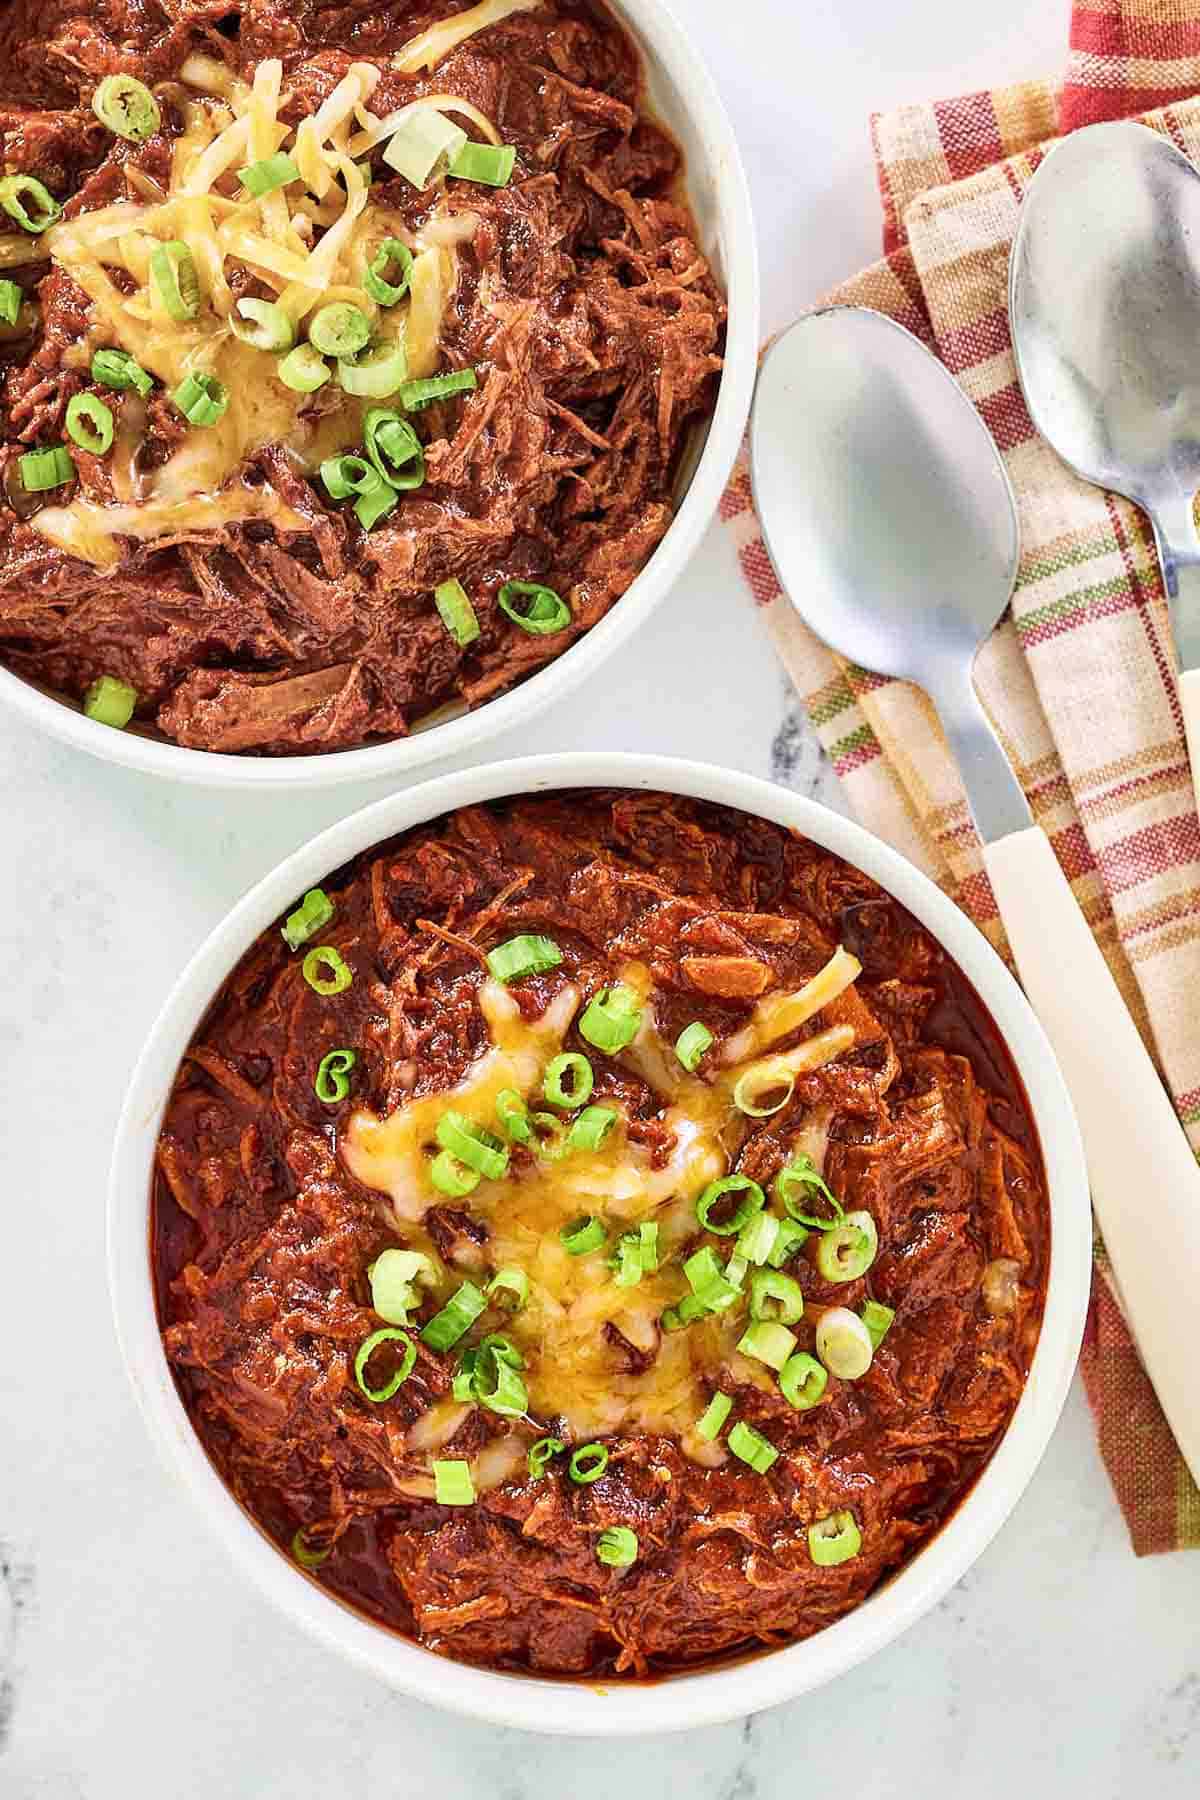 Brisket chili topped with cheese and green onions.